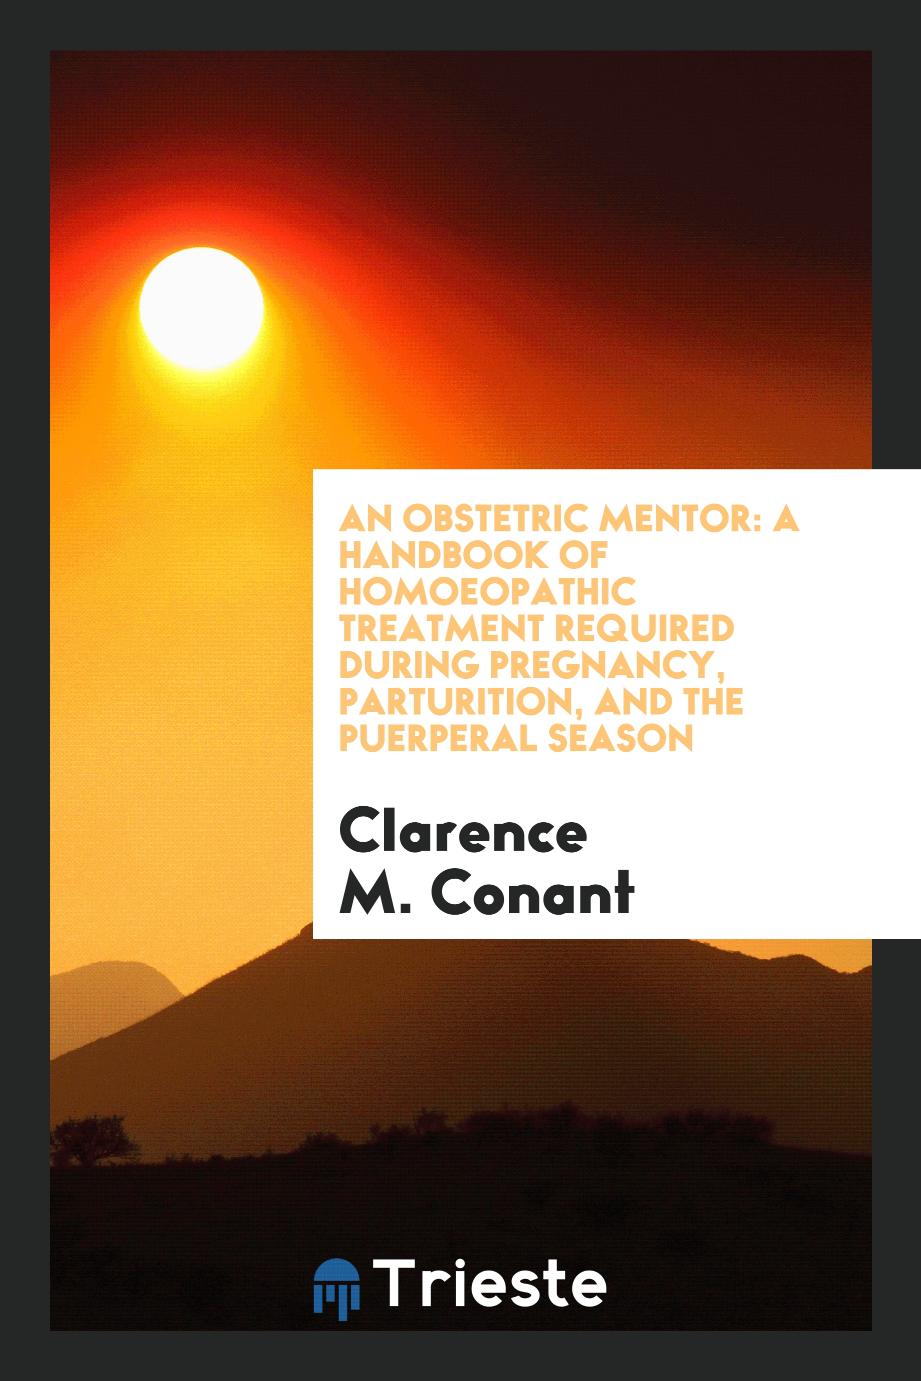 An Obstetric Mentor: A Handbook of Homoeopathic Treatment Required during Pregnancy, Parturition, and the Puerperal Season